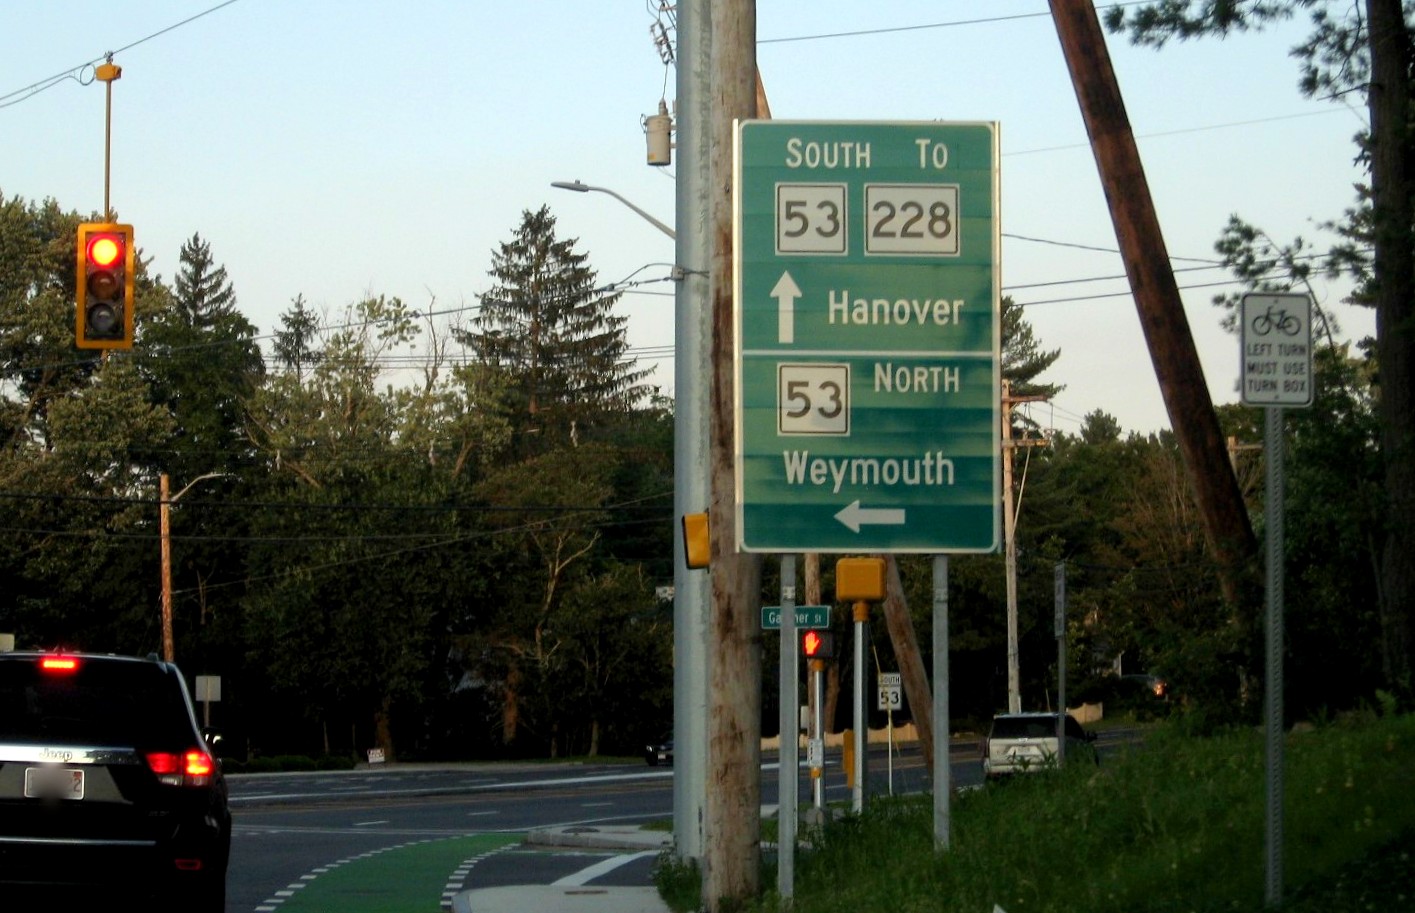 Newly placed new 2 post MassDOT guide sign headed east for intersection of Derby Street and Whiting Street in Hingham, July 2021